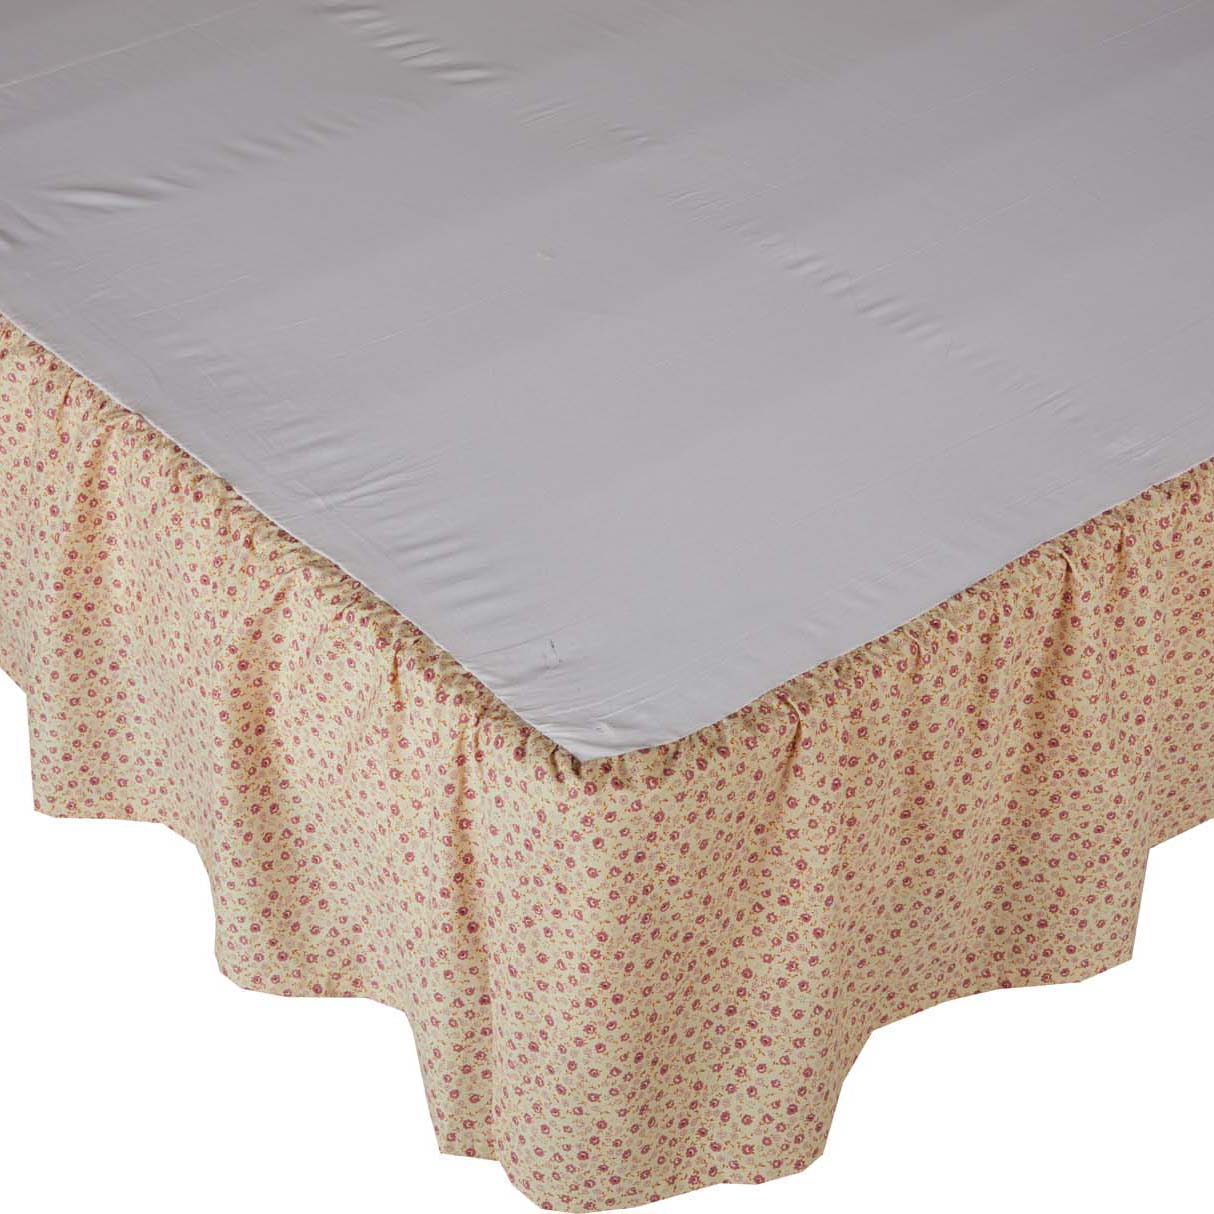 Camilia King Bed Skirt 78x80x16 VHC Brands